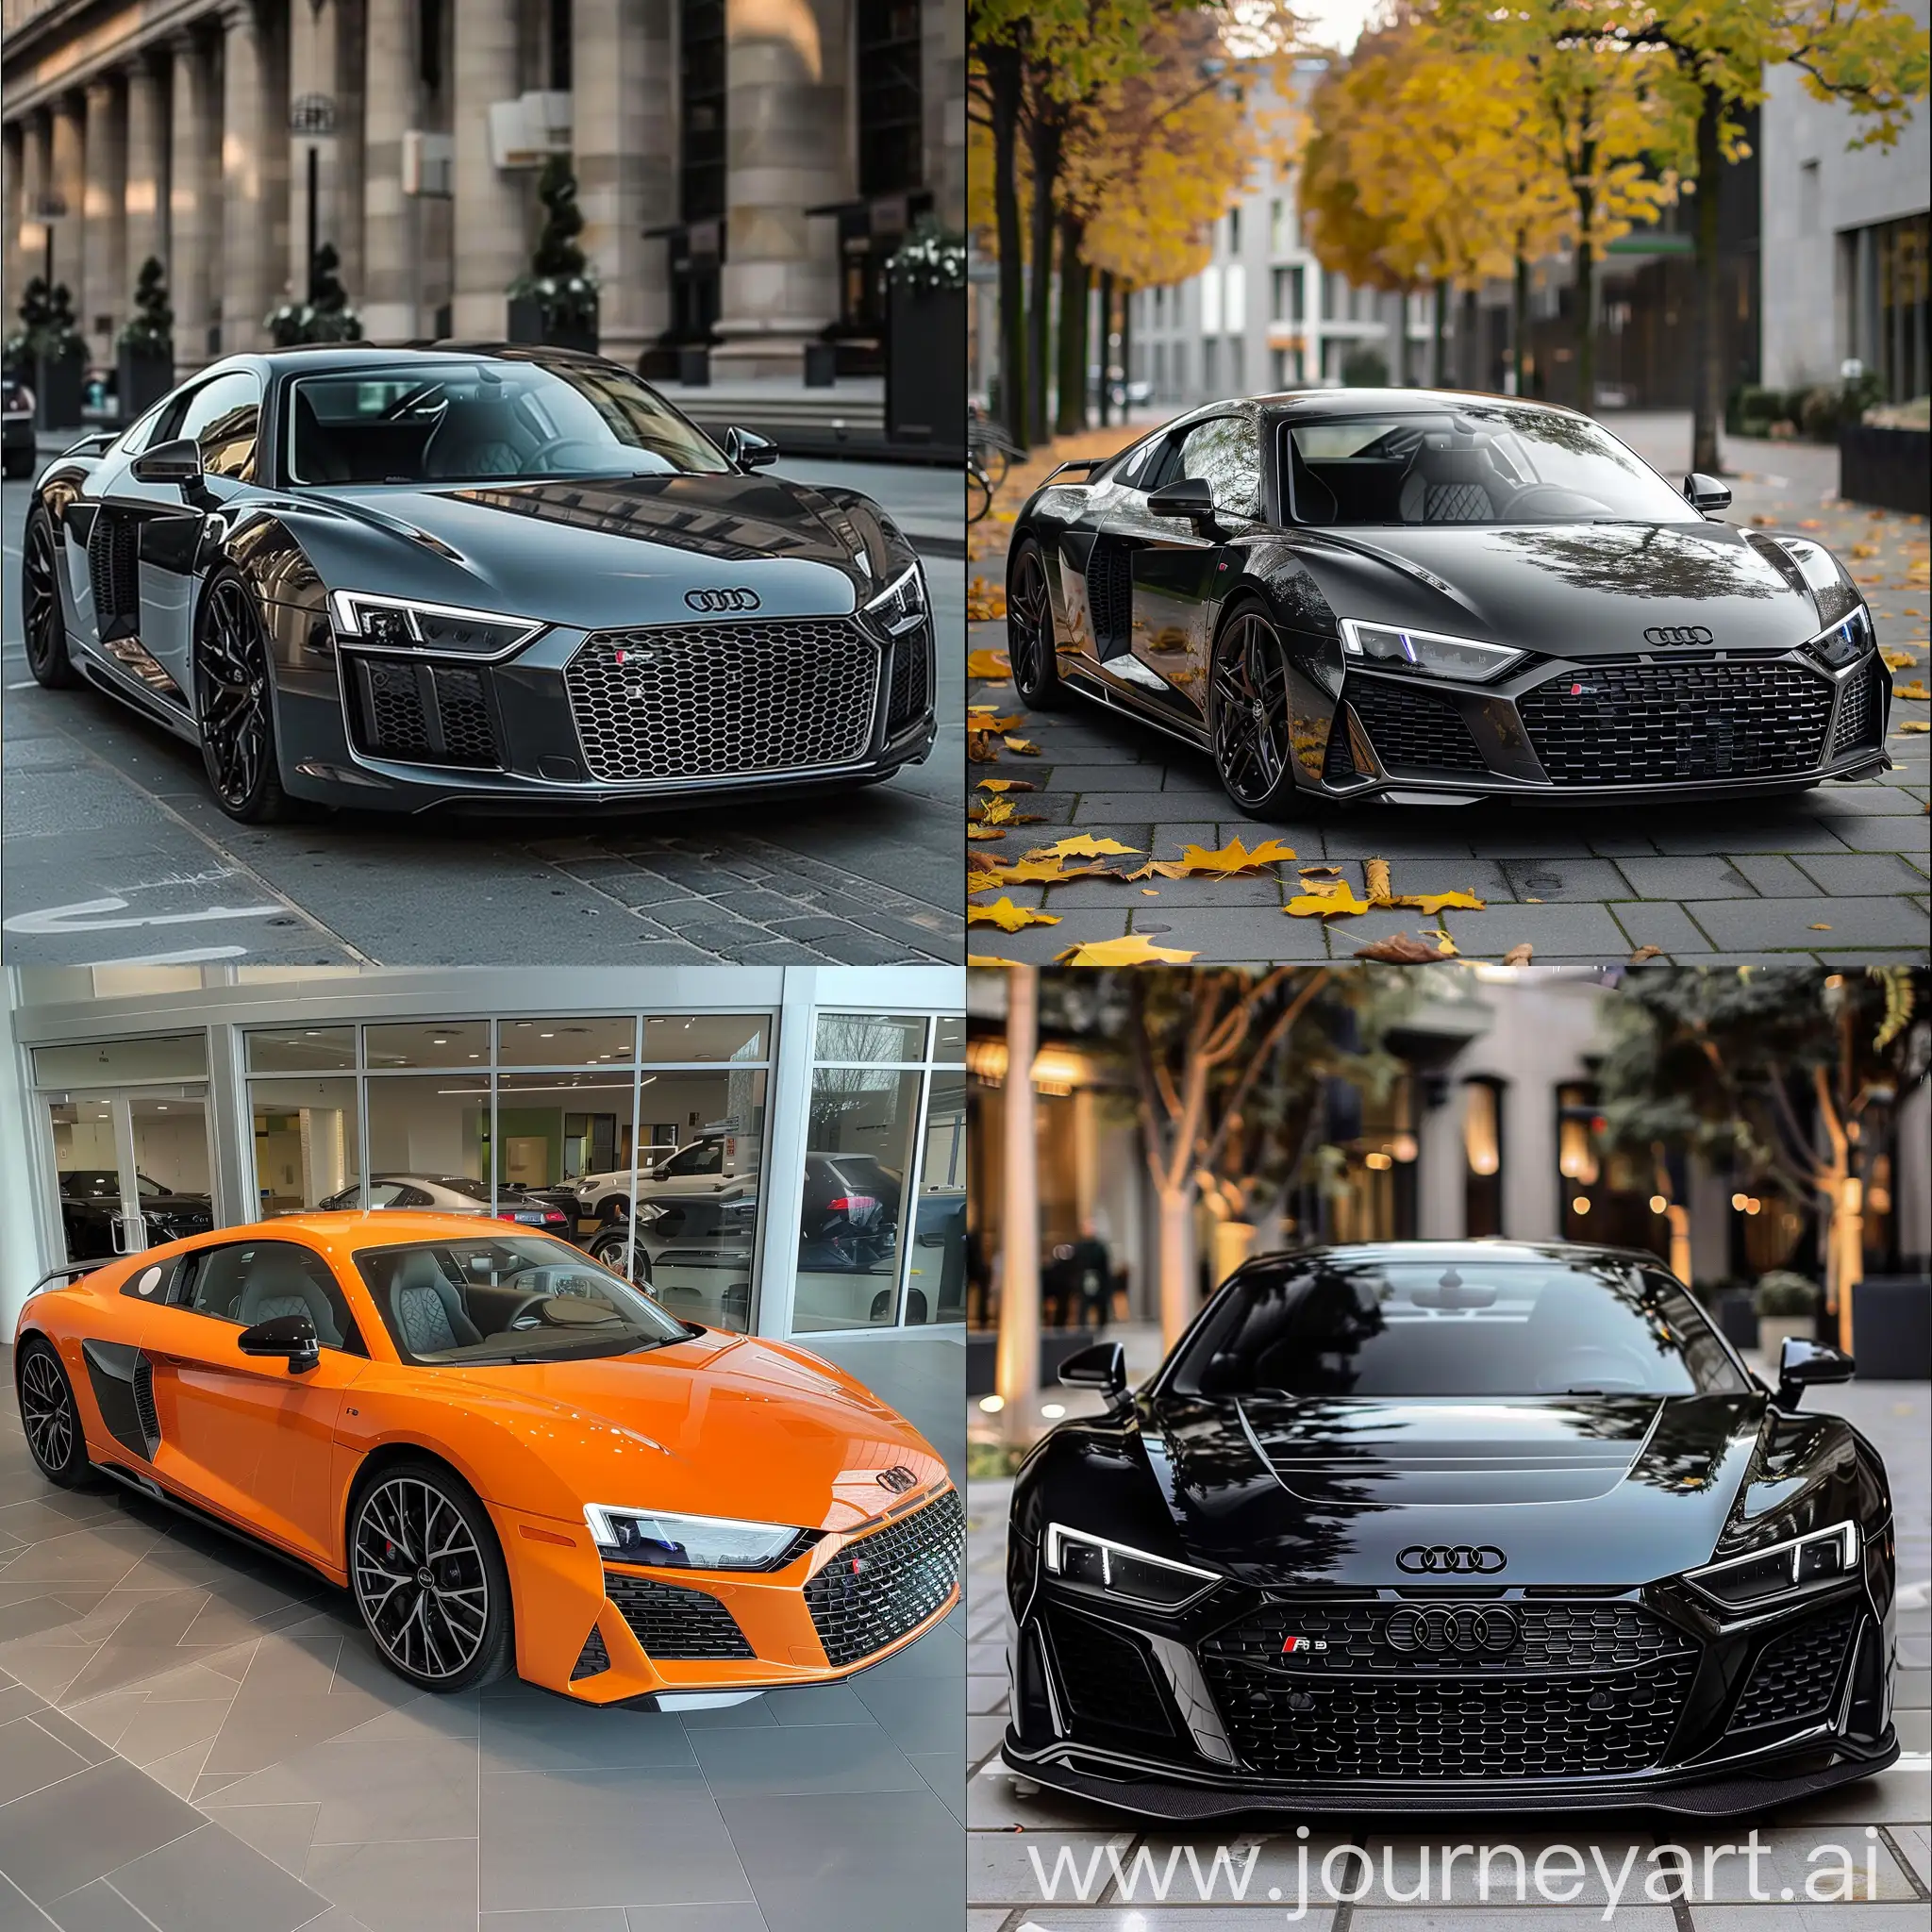 Luxury-Sports-Car-Fusion-Audi-R8-with-BMW-Grille-and-Design